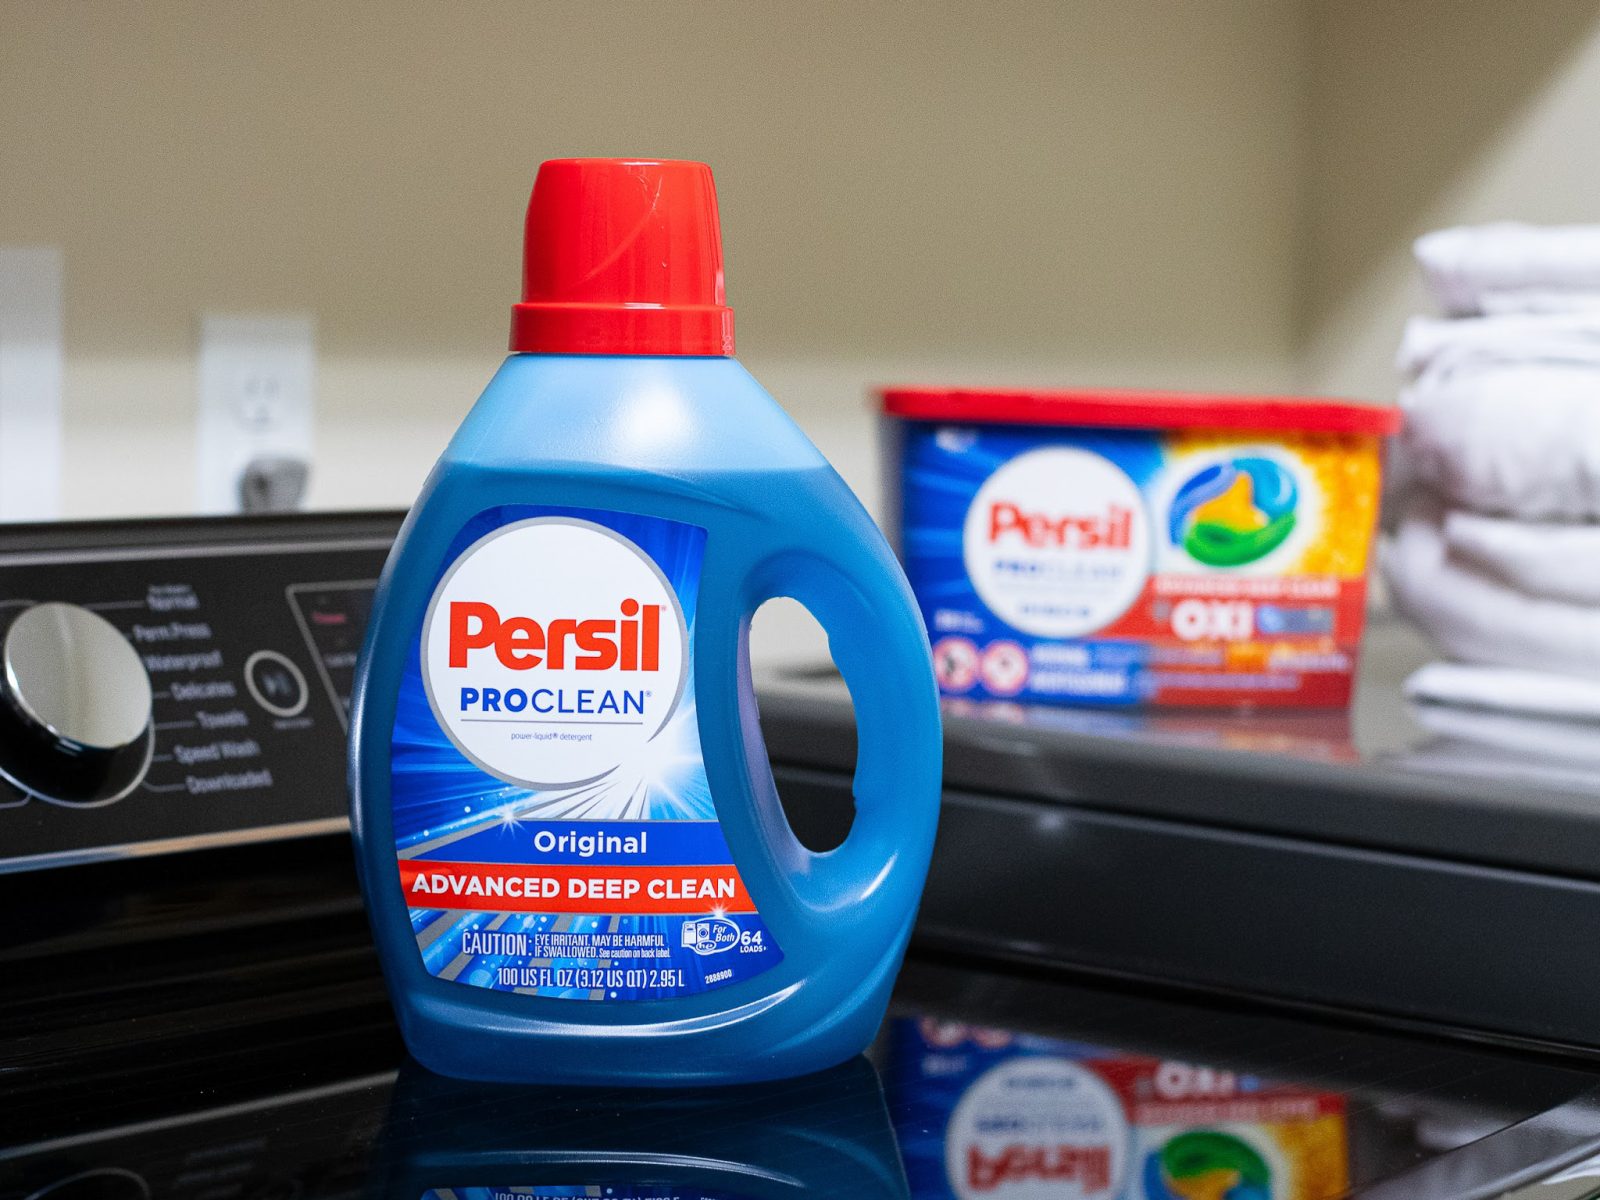 Persil ProClean Detergent Coupon For New Mega Sale – As Low As $9.99 At Kroger (Regular Price $16.99)